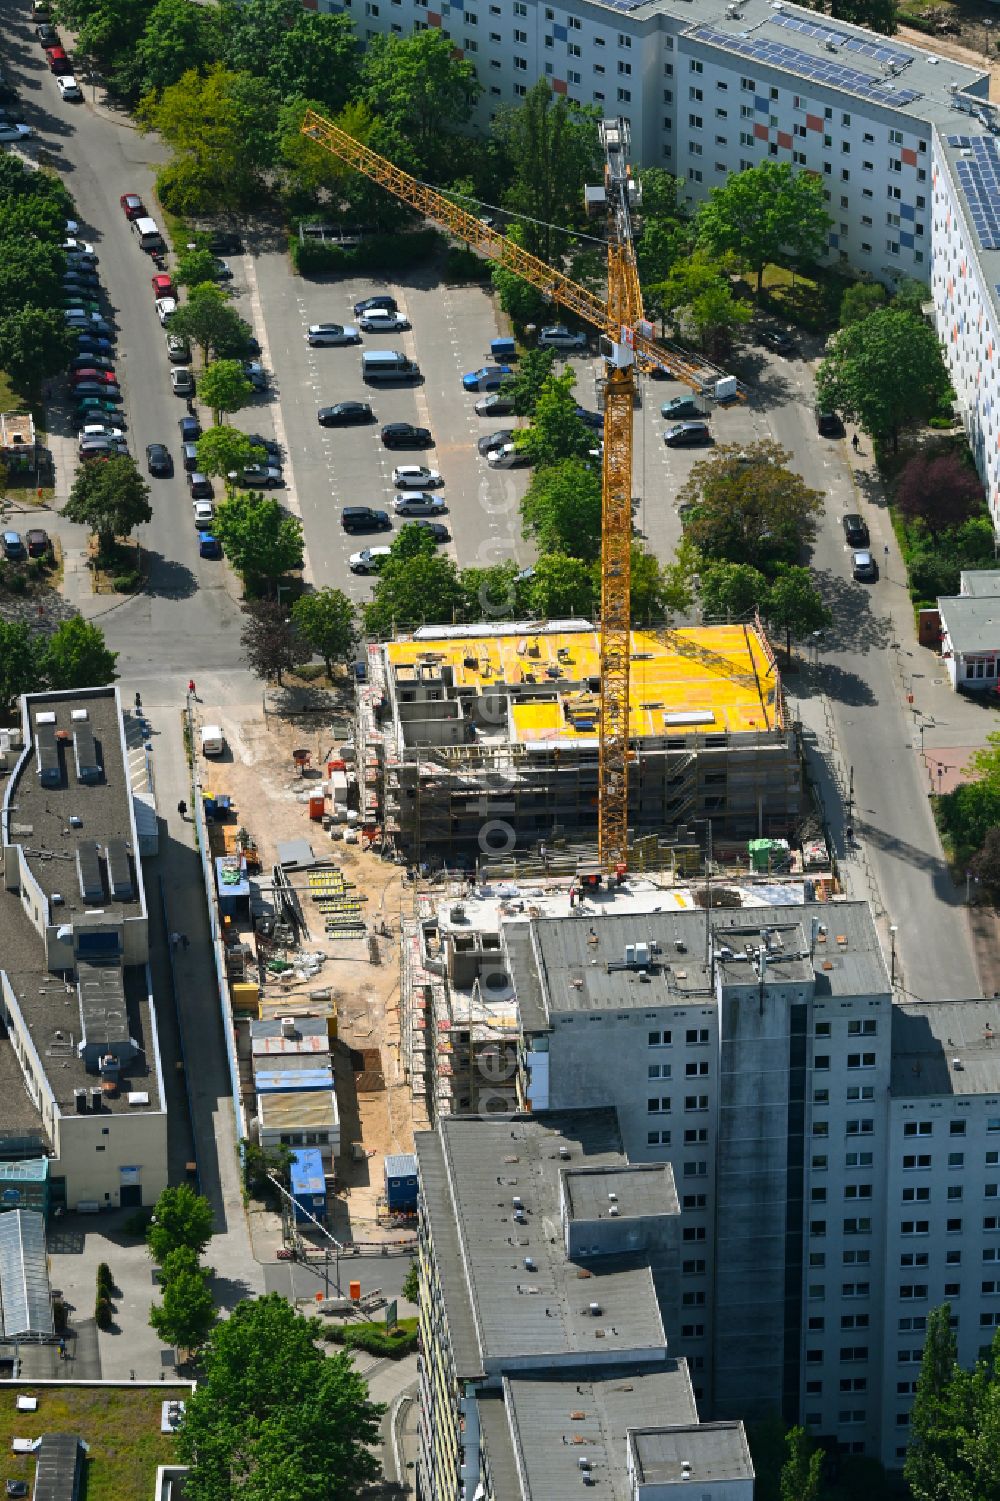 Berlin from the bird's eye view: Construction site for the multi-family residential building on Ludwigsluster Strasse on street Teterower Ring in the district Hellersdorf in Berlin, Germany